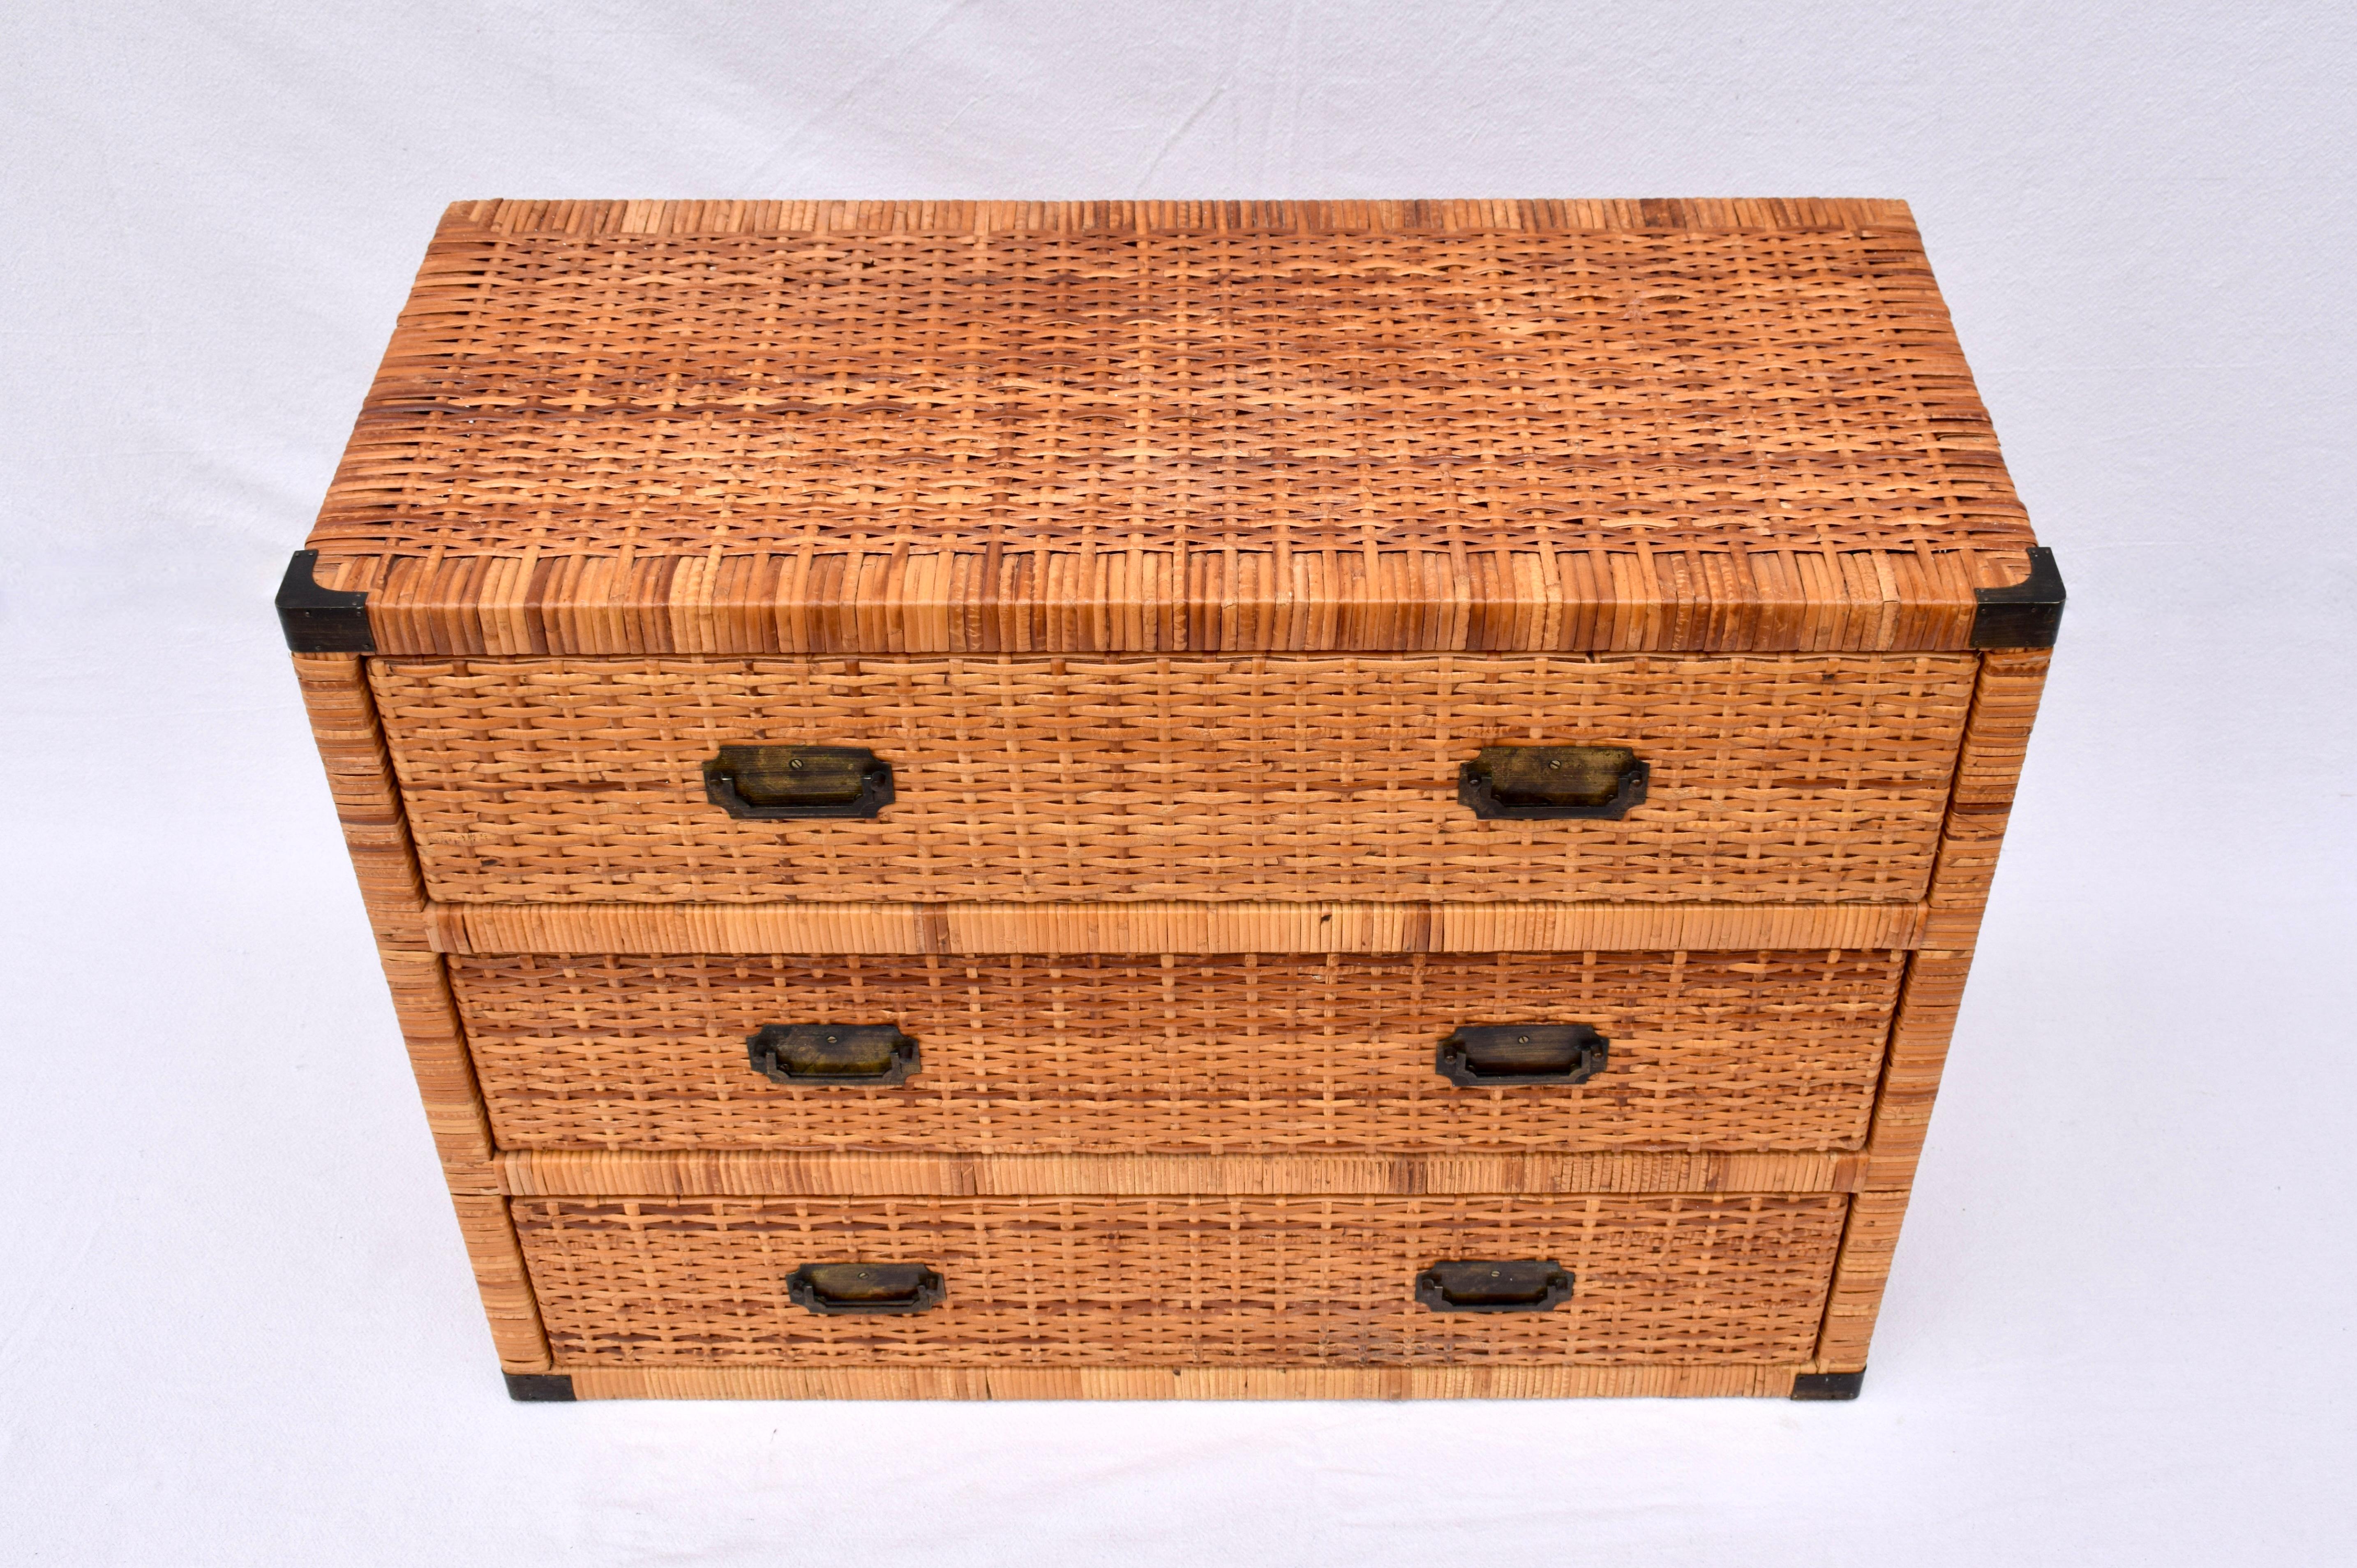 Woven rattan chest of three drawers in the campaign style with rich honey tones & all original brass hardware. Generous storage in beautifully maintained condition ready for use..